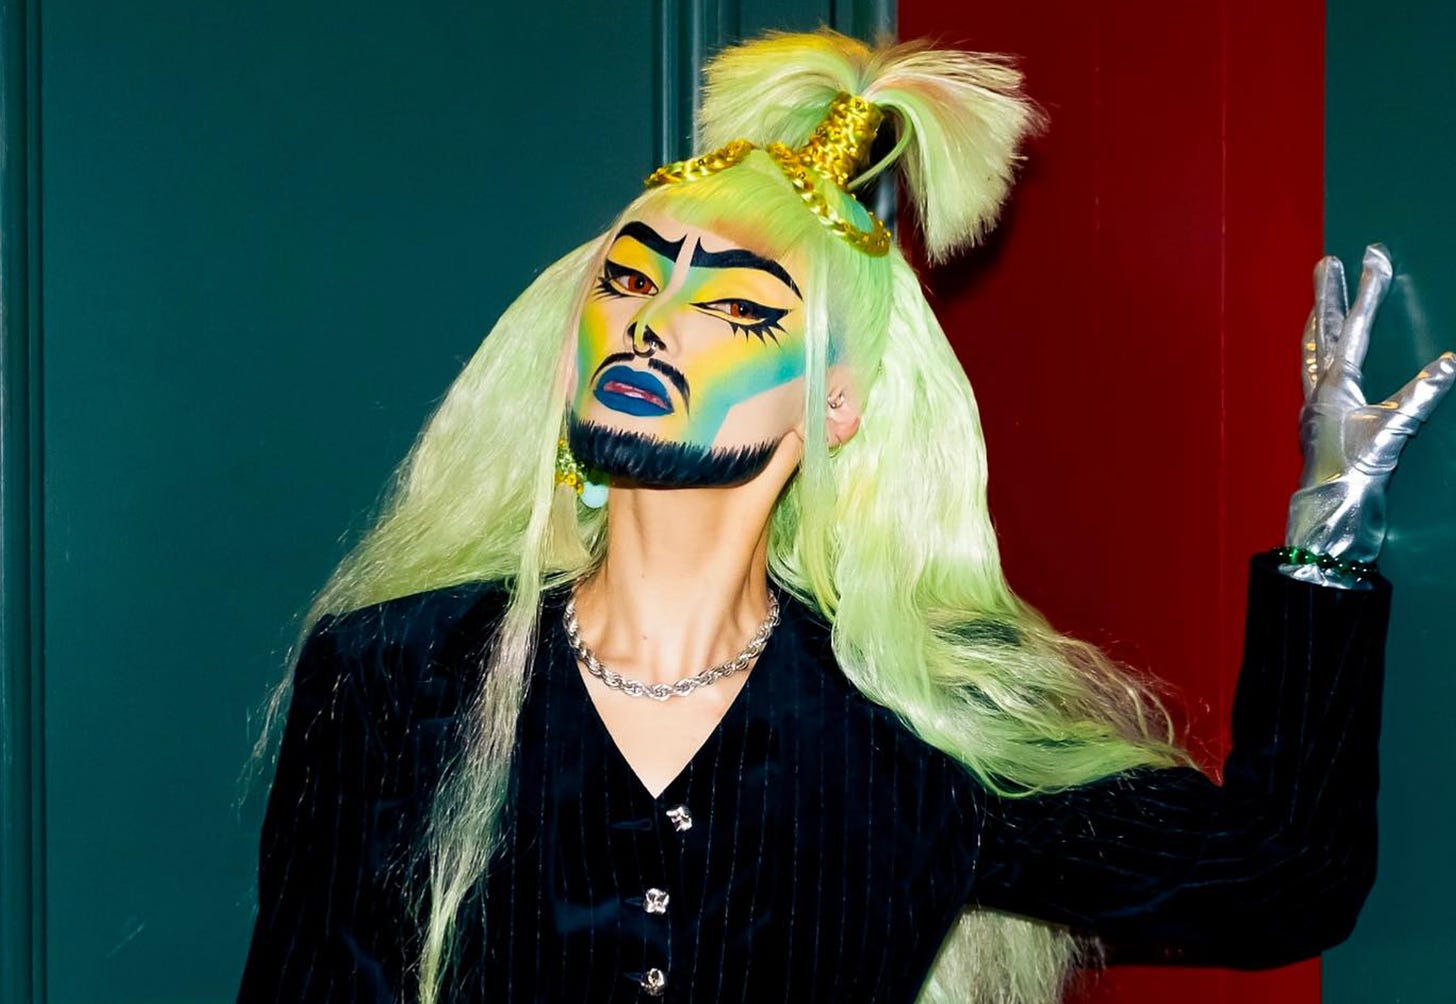 An artist leans against a wall, wearing meticulously painted makeup in yellows, greens, and blues, with a severe painted beard and vibrant green-yellow hair with a lock wrapped in gold thread that shoots straight up at the crown.